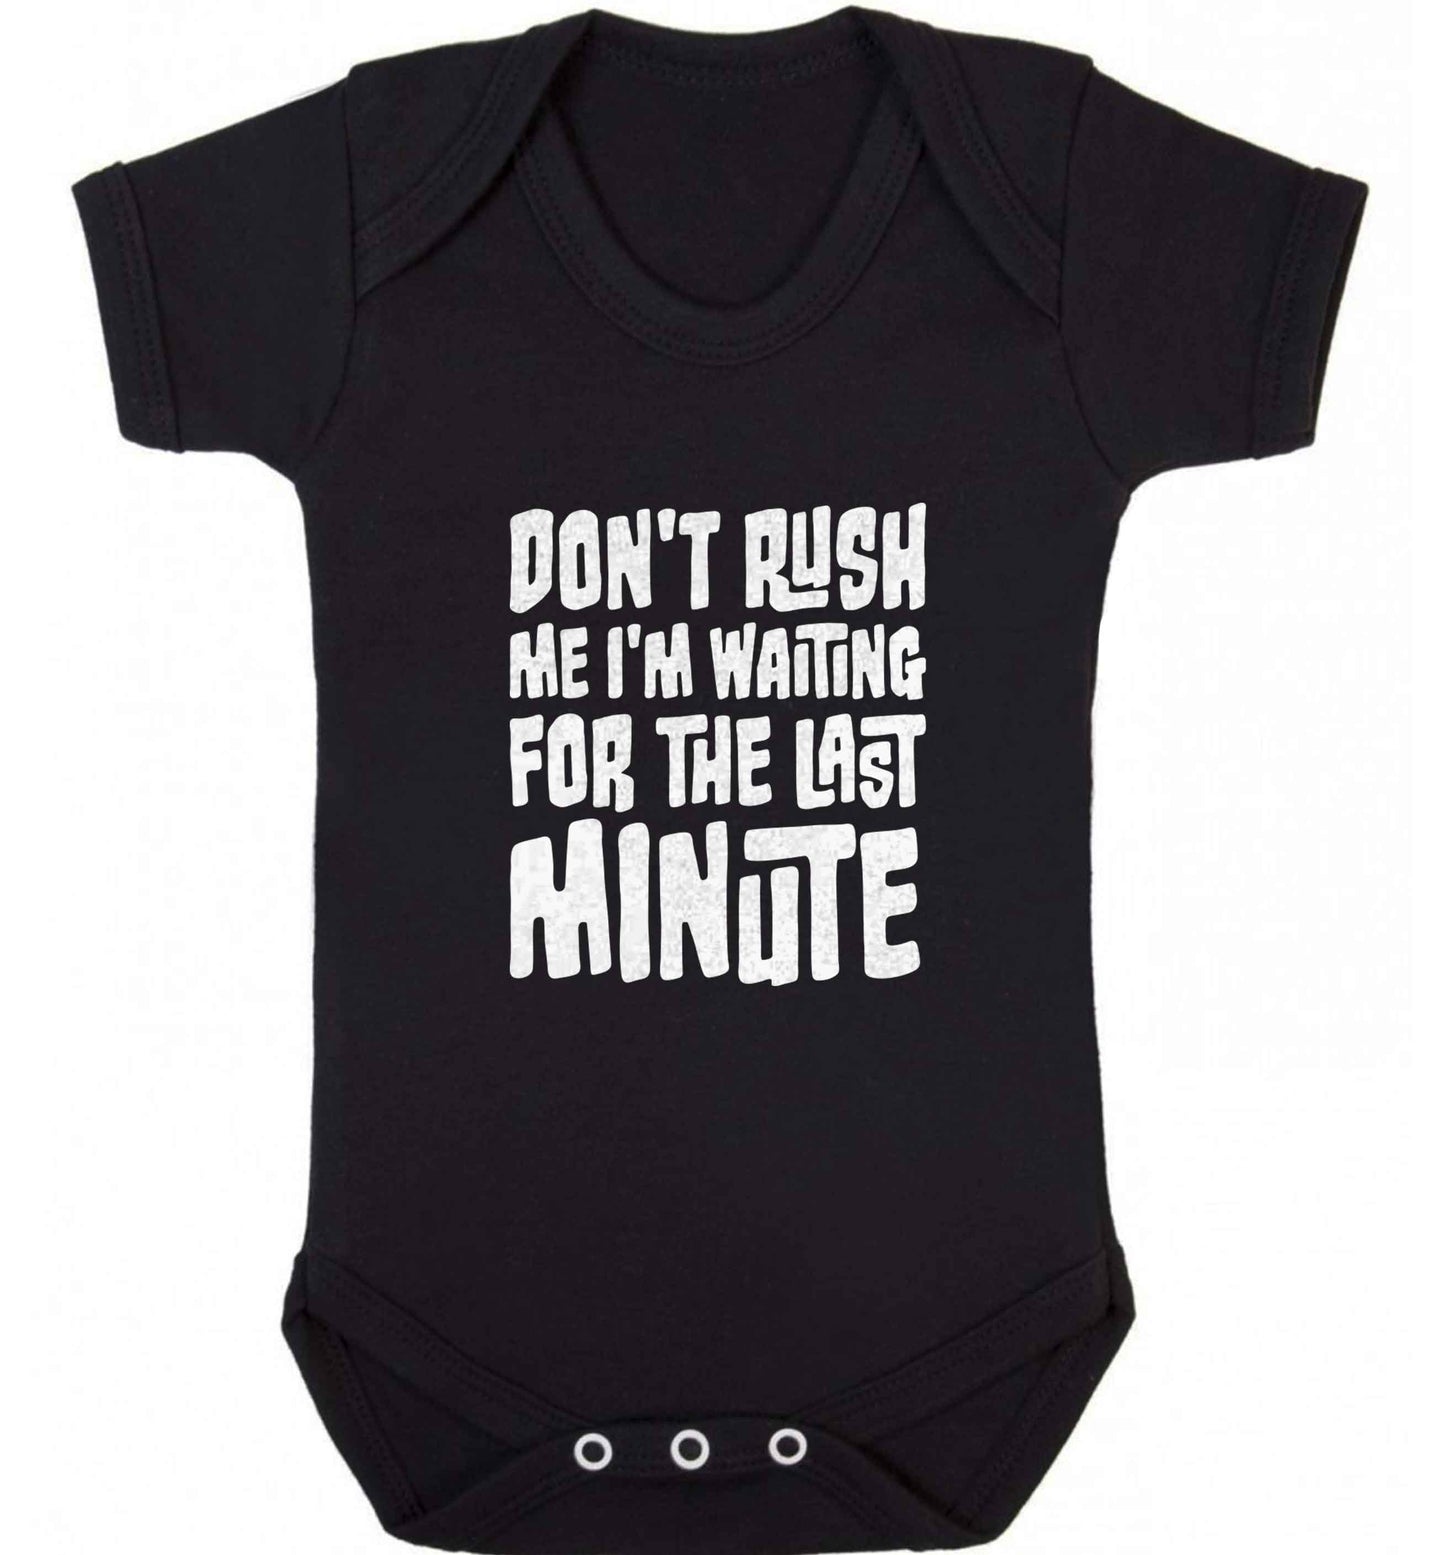 Don't rush me I'm waiting for the last minute baby vest black 18-24 months